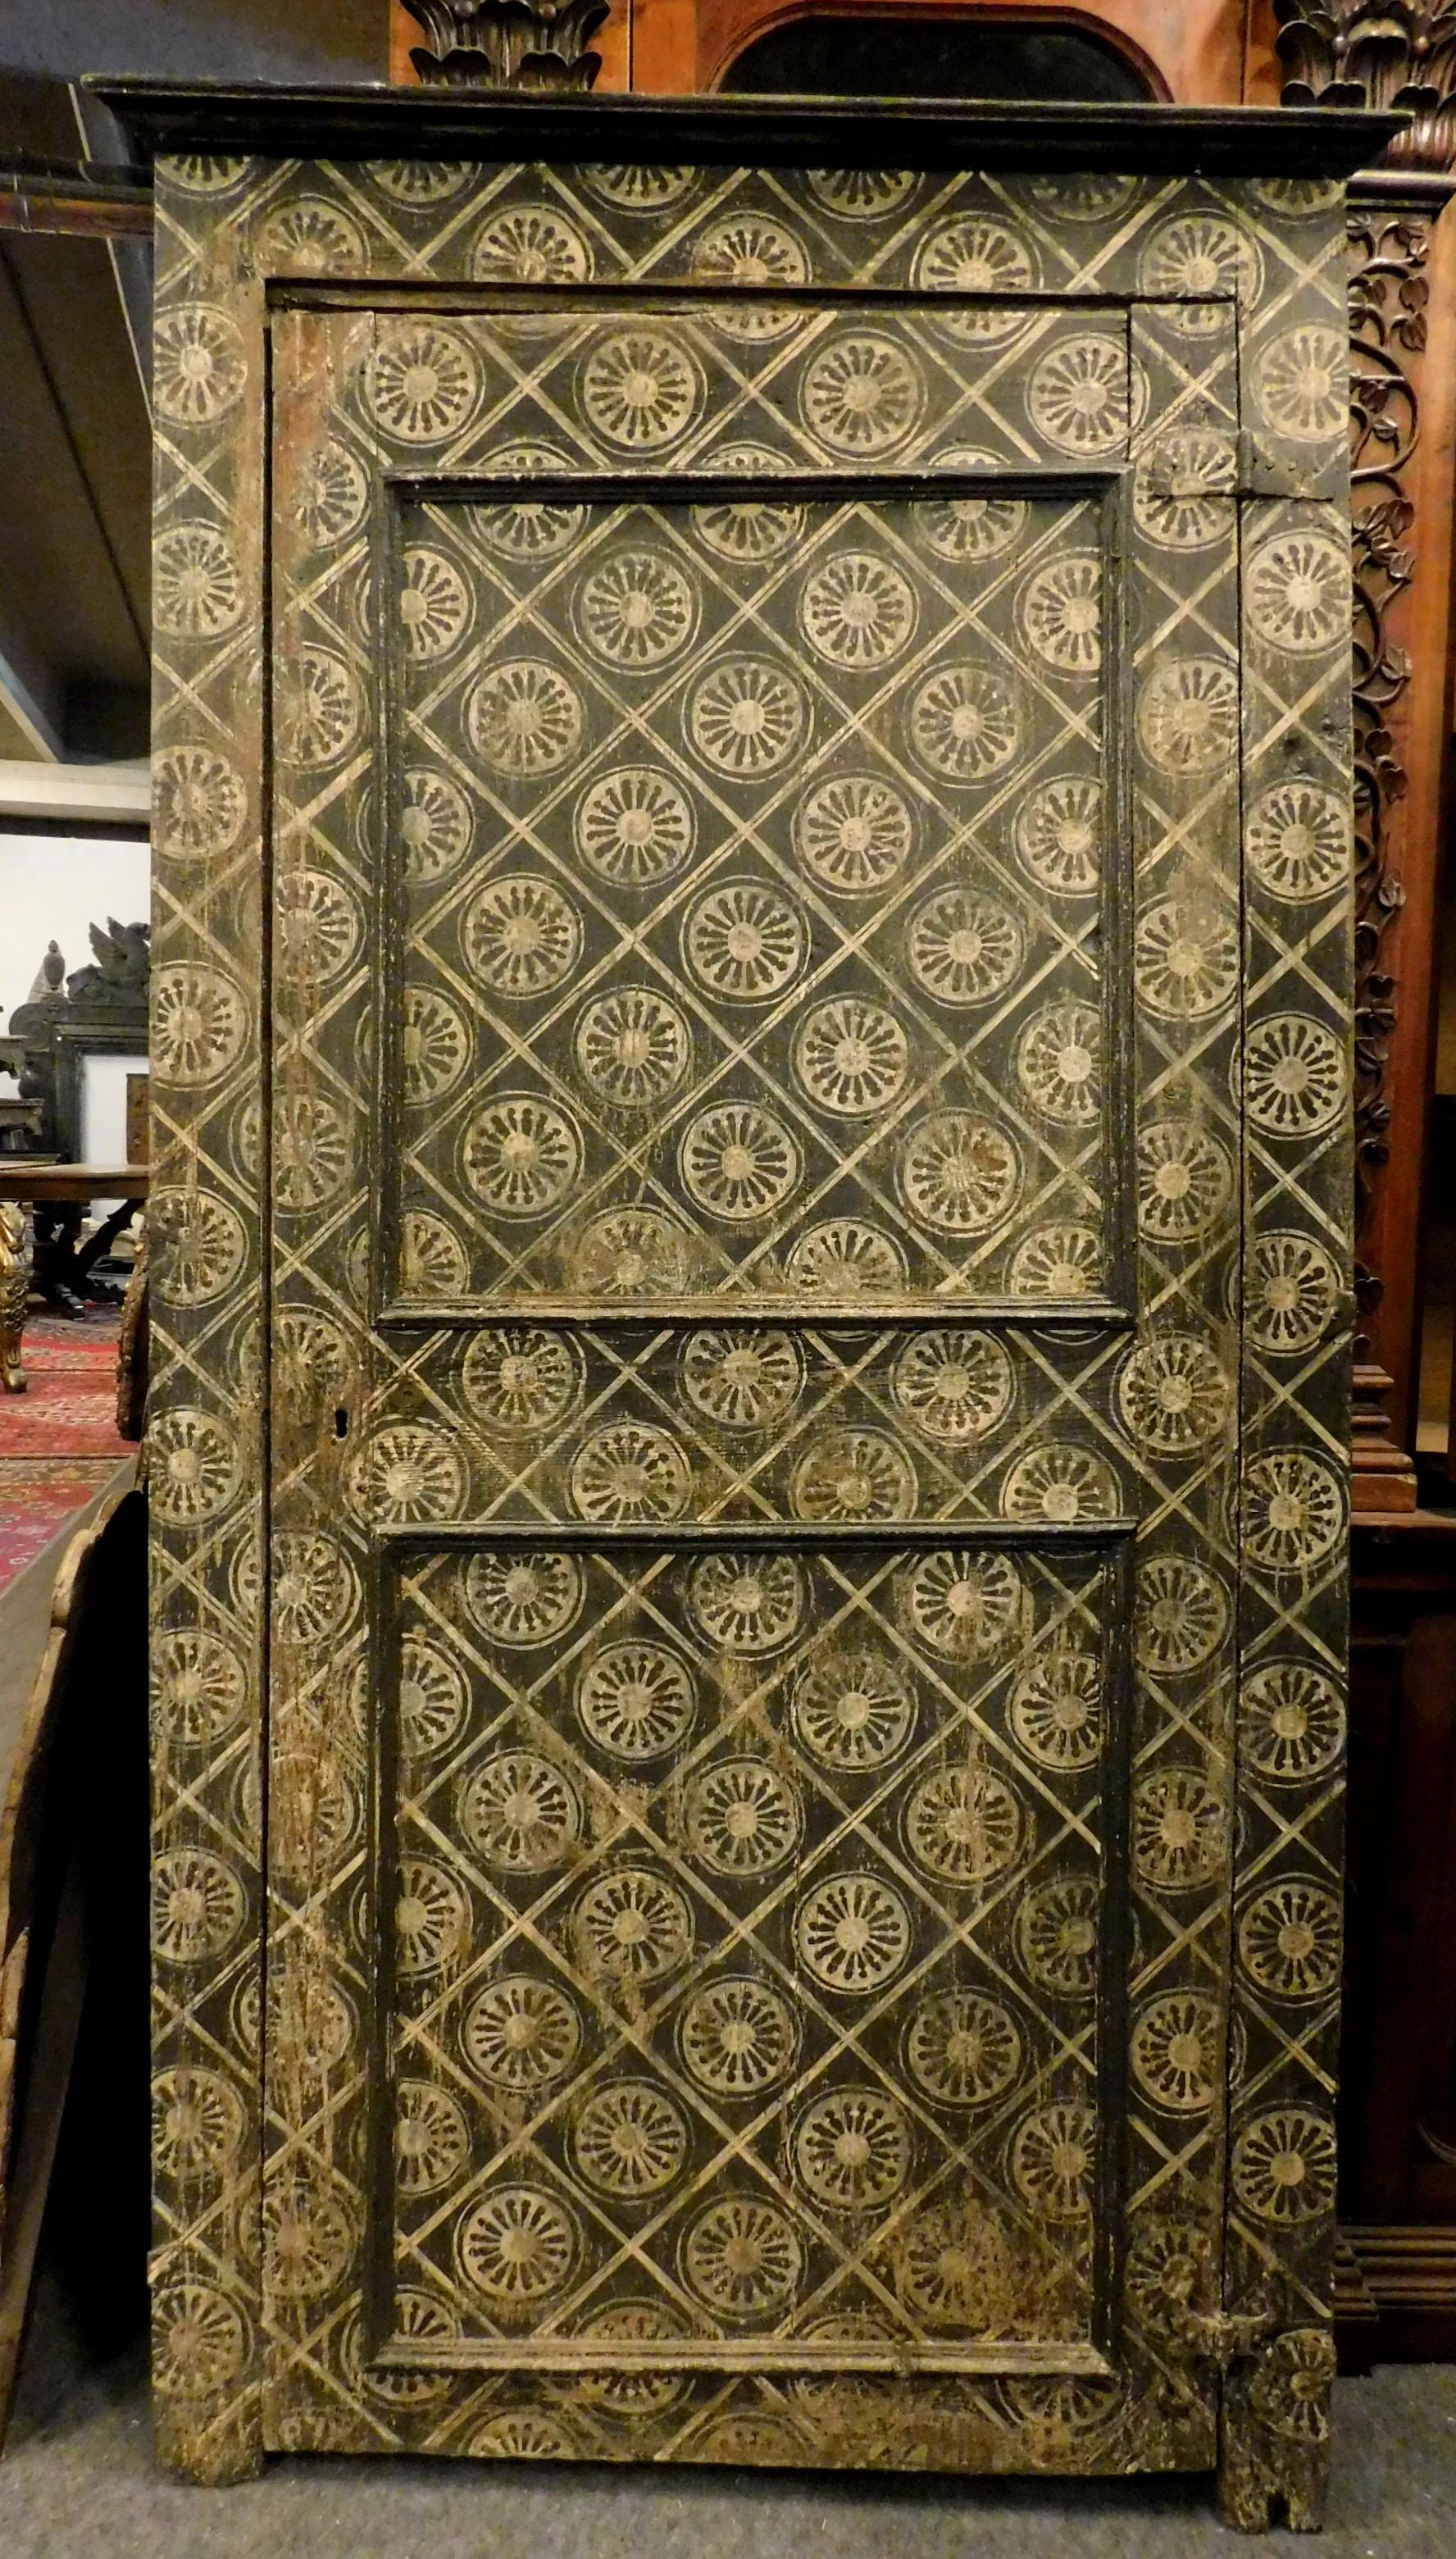 Antique placard, wall cabinet or small door, hand-lacquered with tapestry texture, built entirely by hand and lacquered in the 18th century for a palace in Frirenze, Italy.
It was born as a door to a built-in wardrobe hidden in a tapestry with the